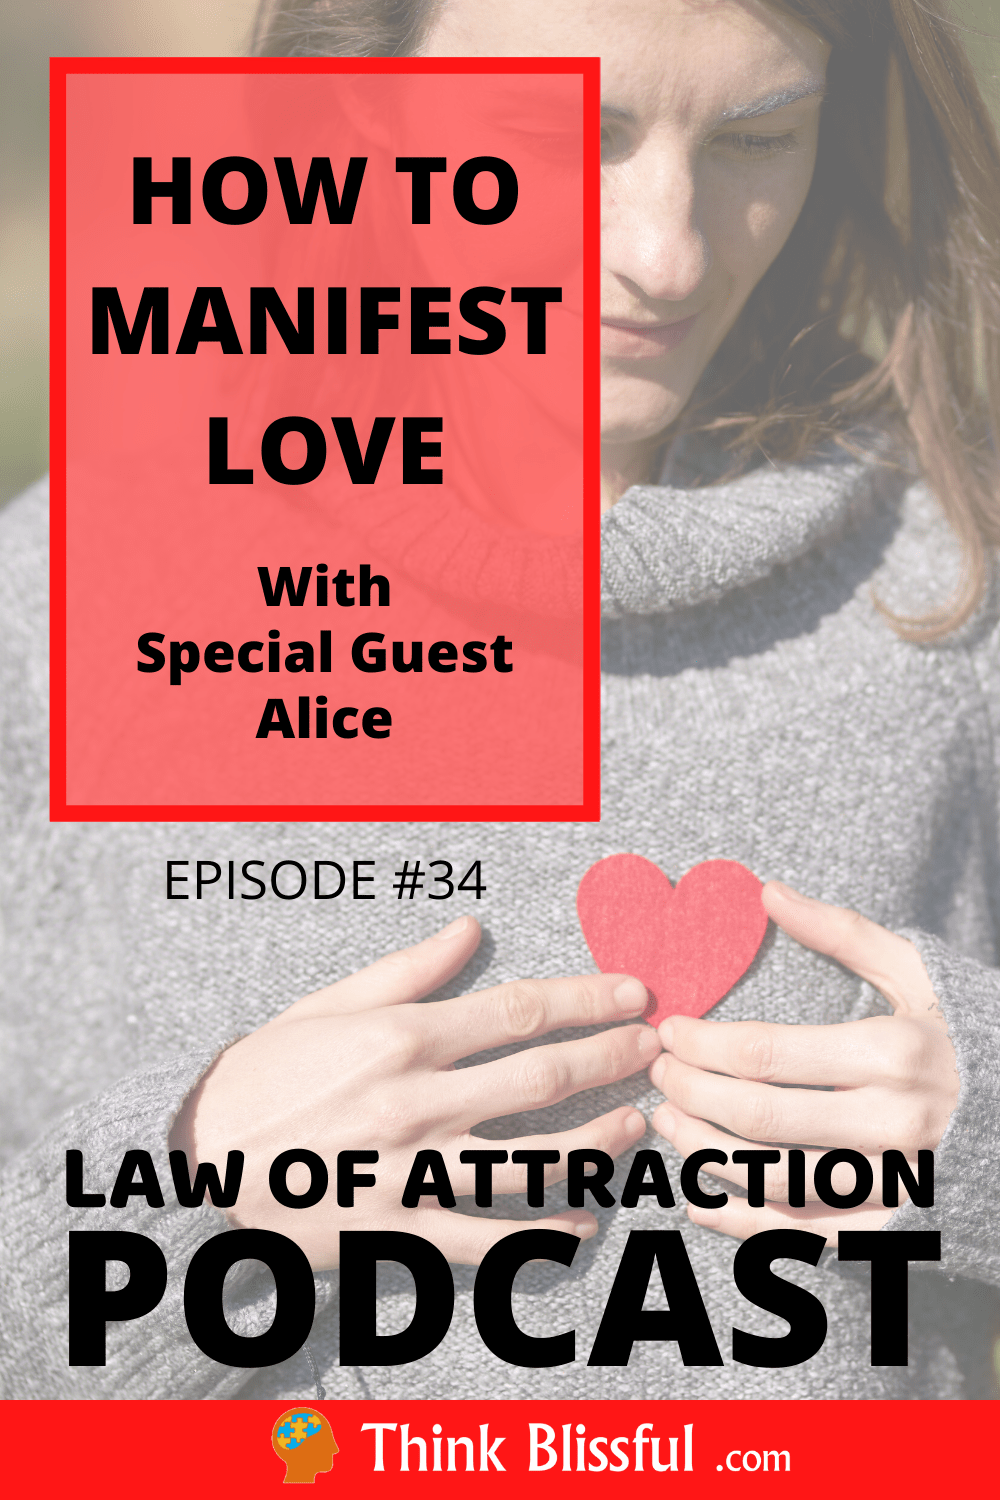 How To Manifest Love With Special Guest Alice of Alicett.com